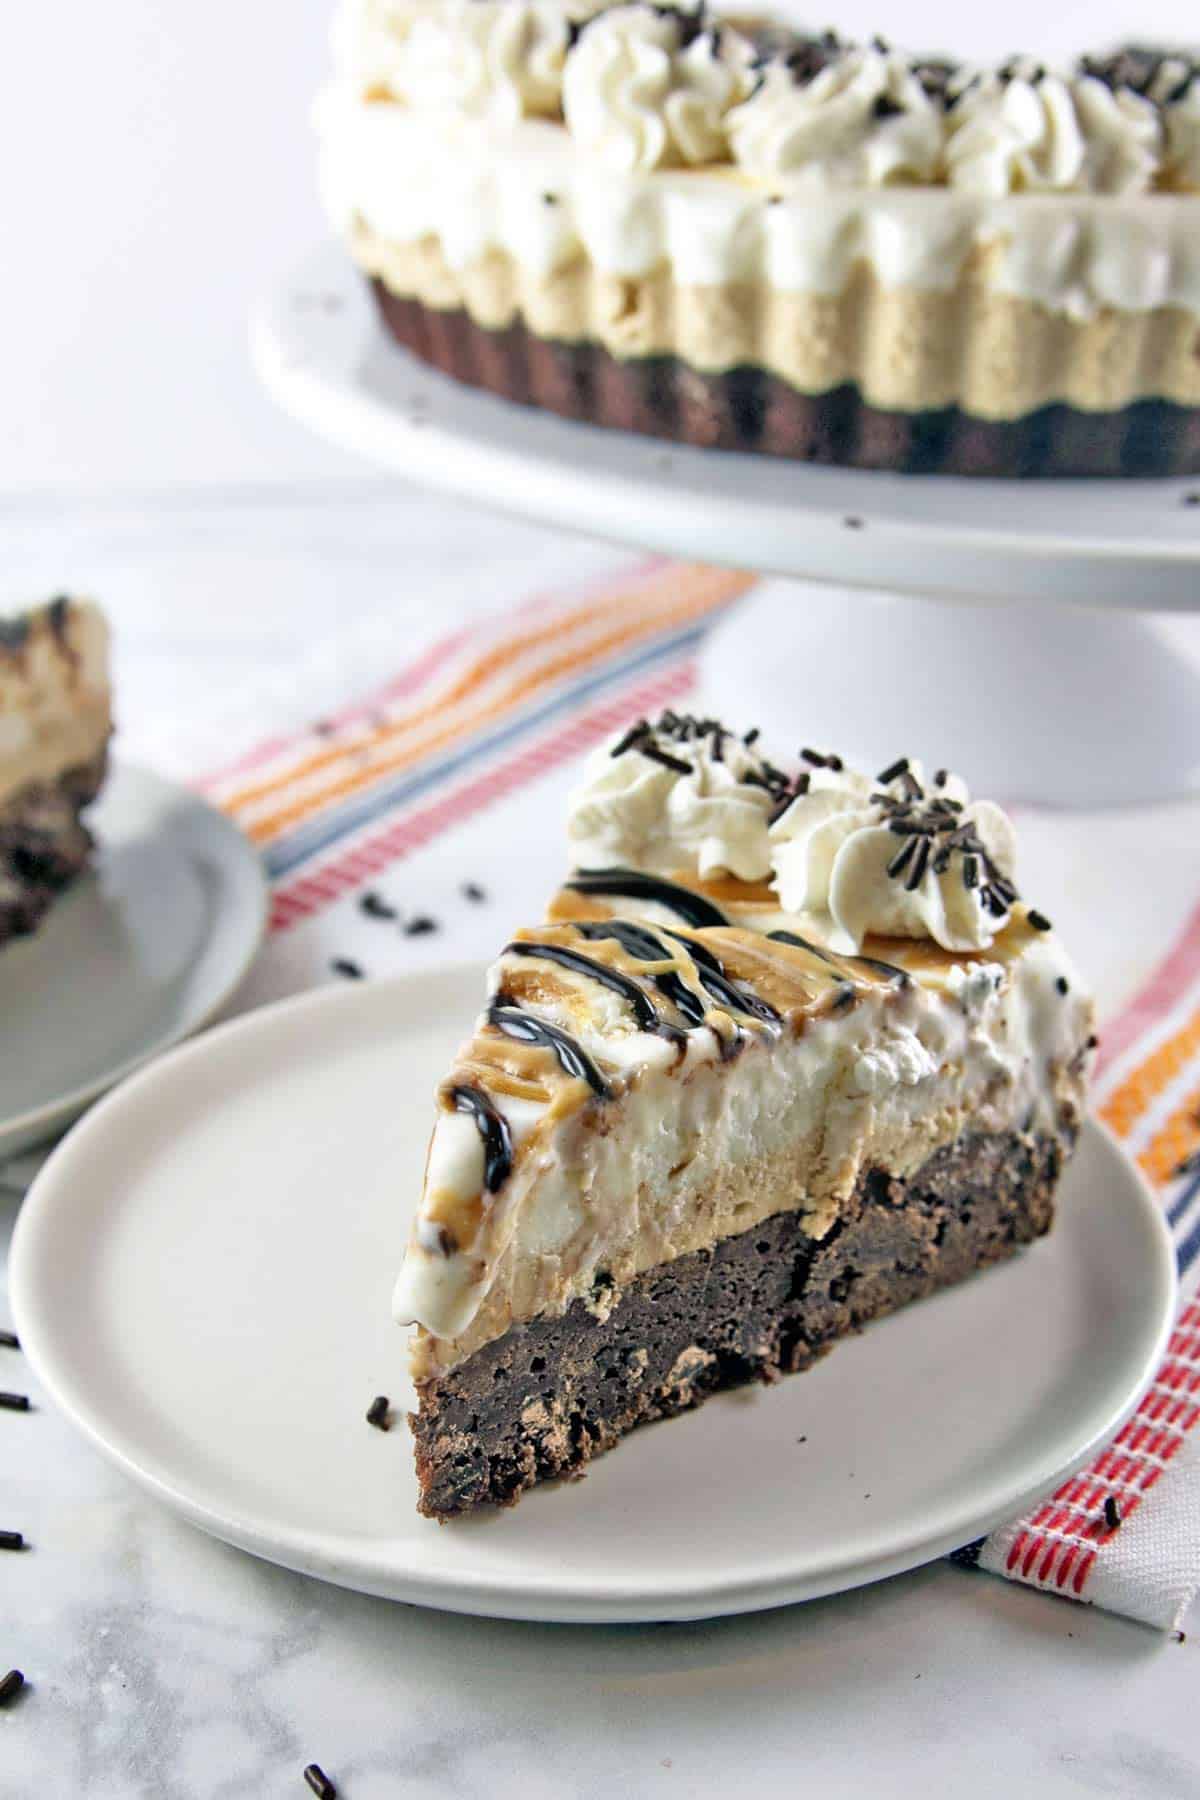 Brownie Bottom Peanut Butter Ice Cream Pie: Why choose between brownies and ice cream when you can make one show-stopping dessert with both? Grab a fork (or spoon) and dig on in! #bunsenburnerbakery #icecream #brownies #icecreampie #icecreamcake